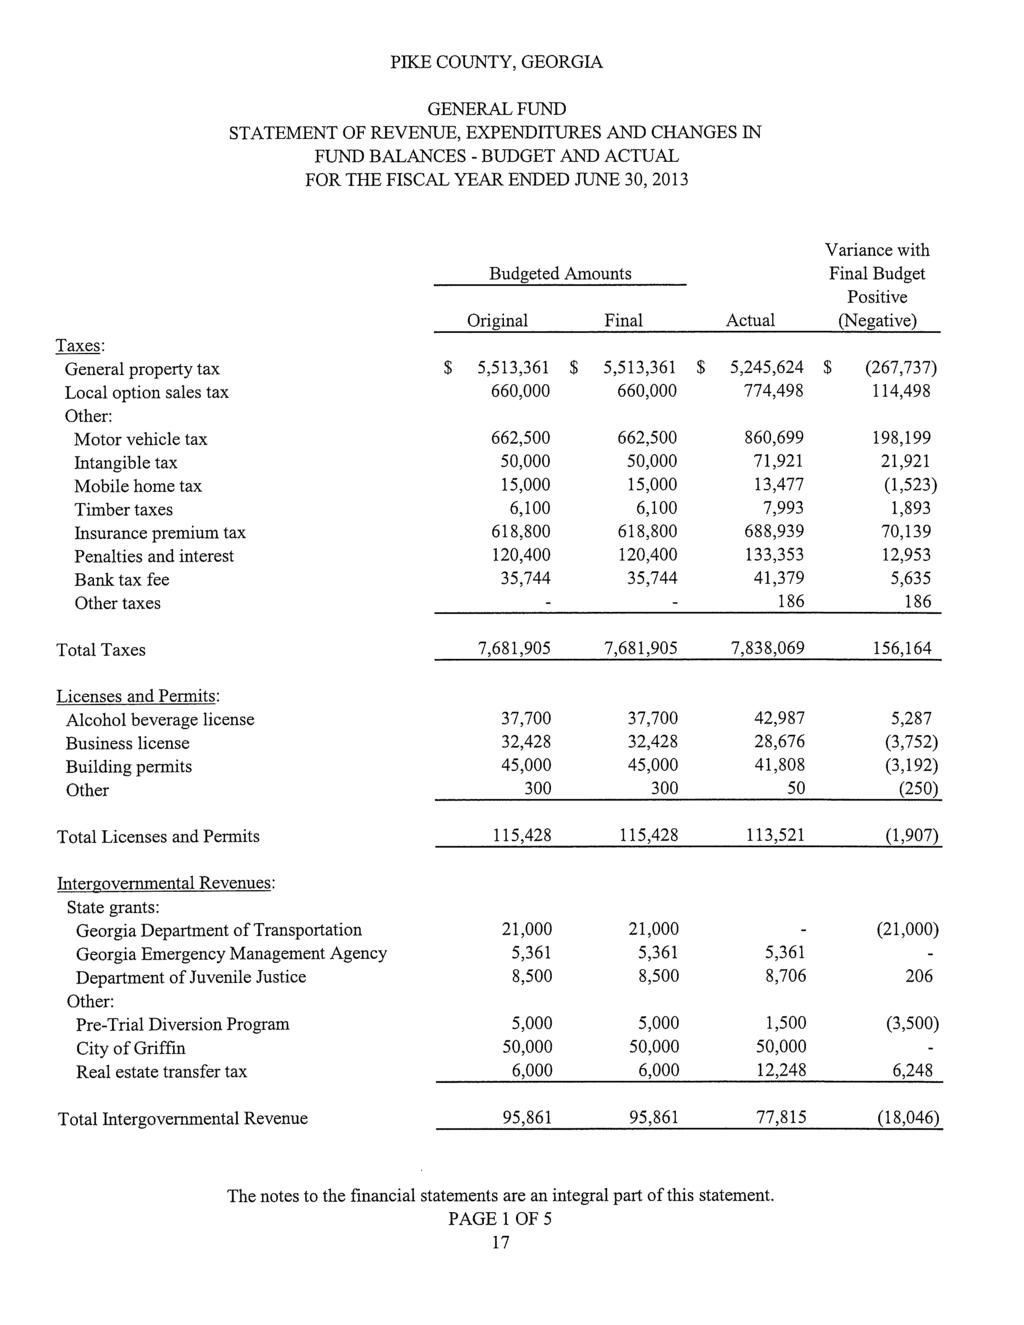 GENERAL FUND STATEMENT OF REVENUE, EXPENDITURES AND CHANGES IN FUND BALANCES - BUDGET AND ACTUAL FOR THE FISCAL YEAR ENDED JUNE 30, 2013 Taxes: General property tax Local option sales tax Other: